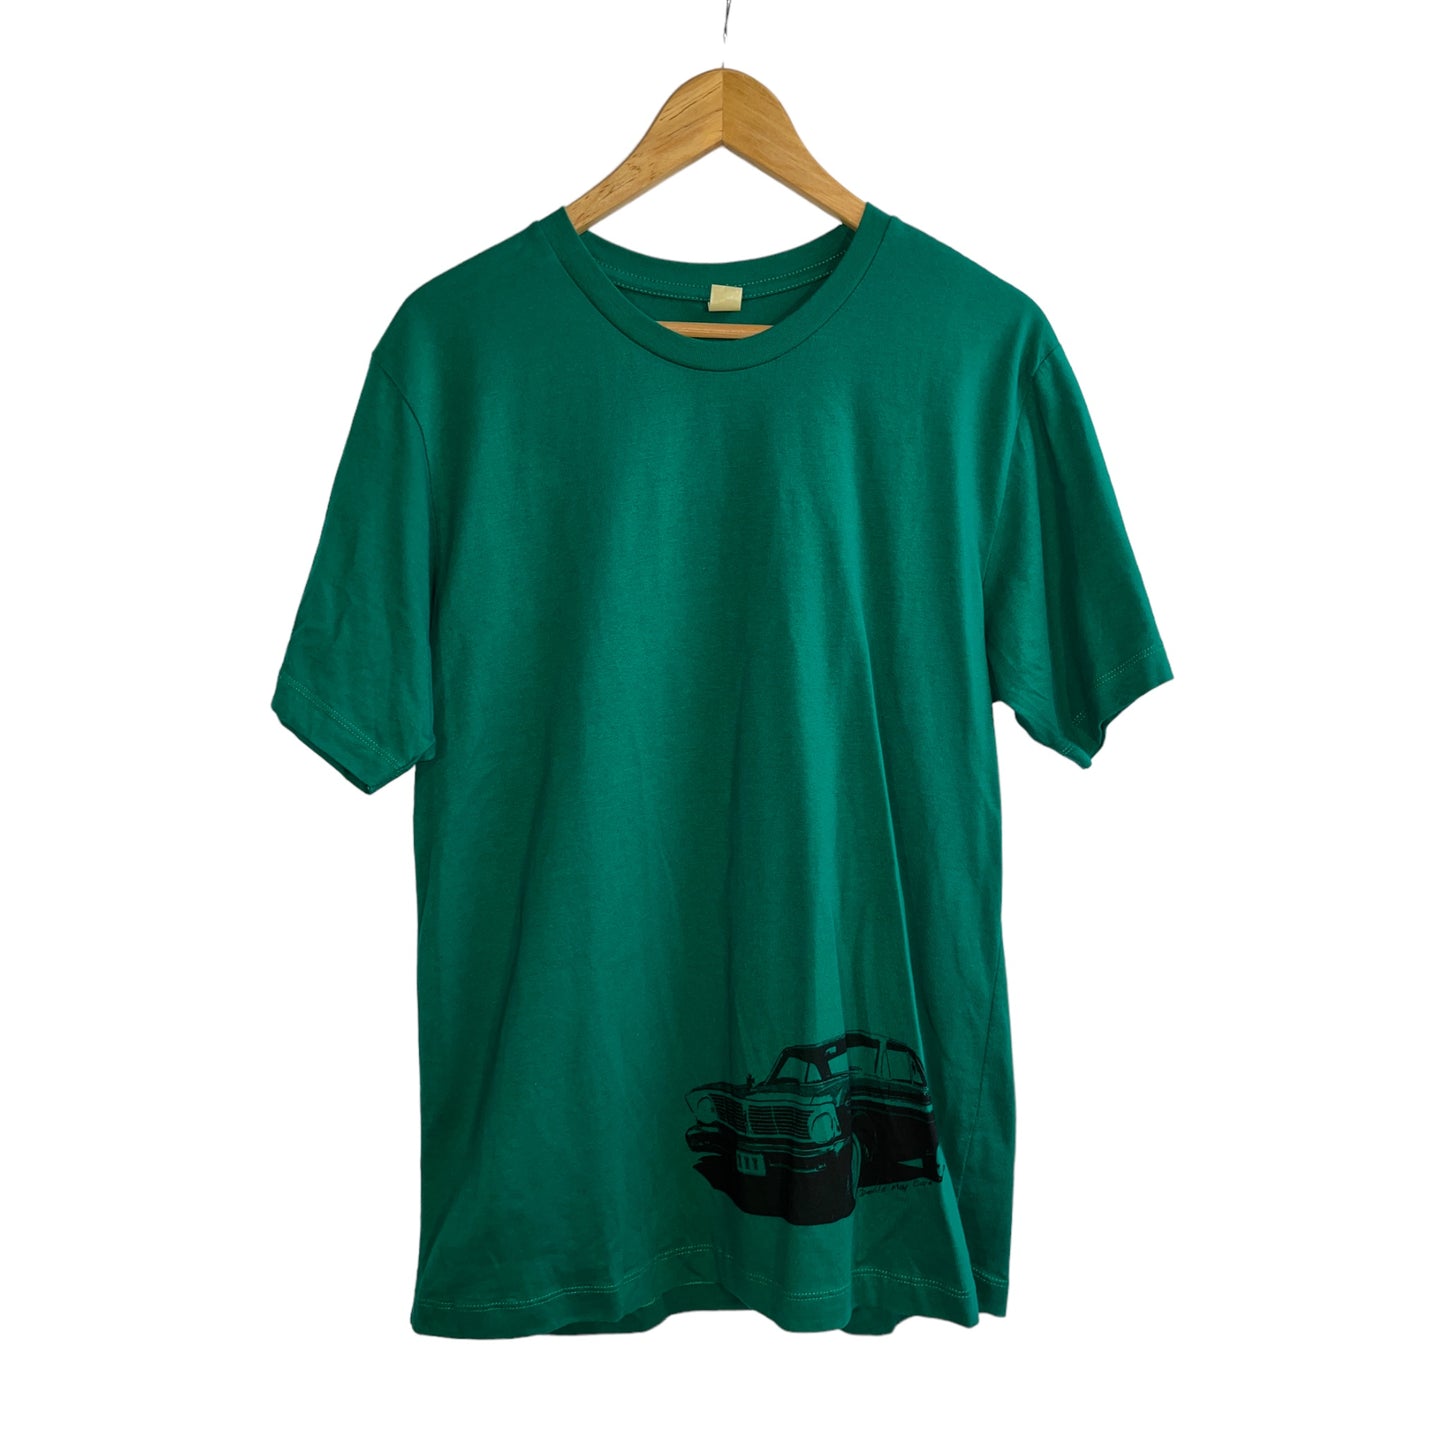 Destination Unkown - Green Crew Neck T-Shirt - By Devils May Care